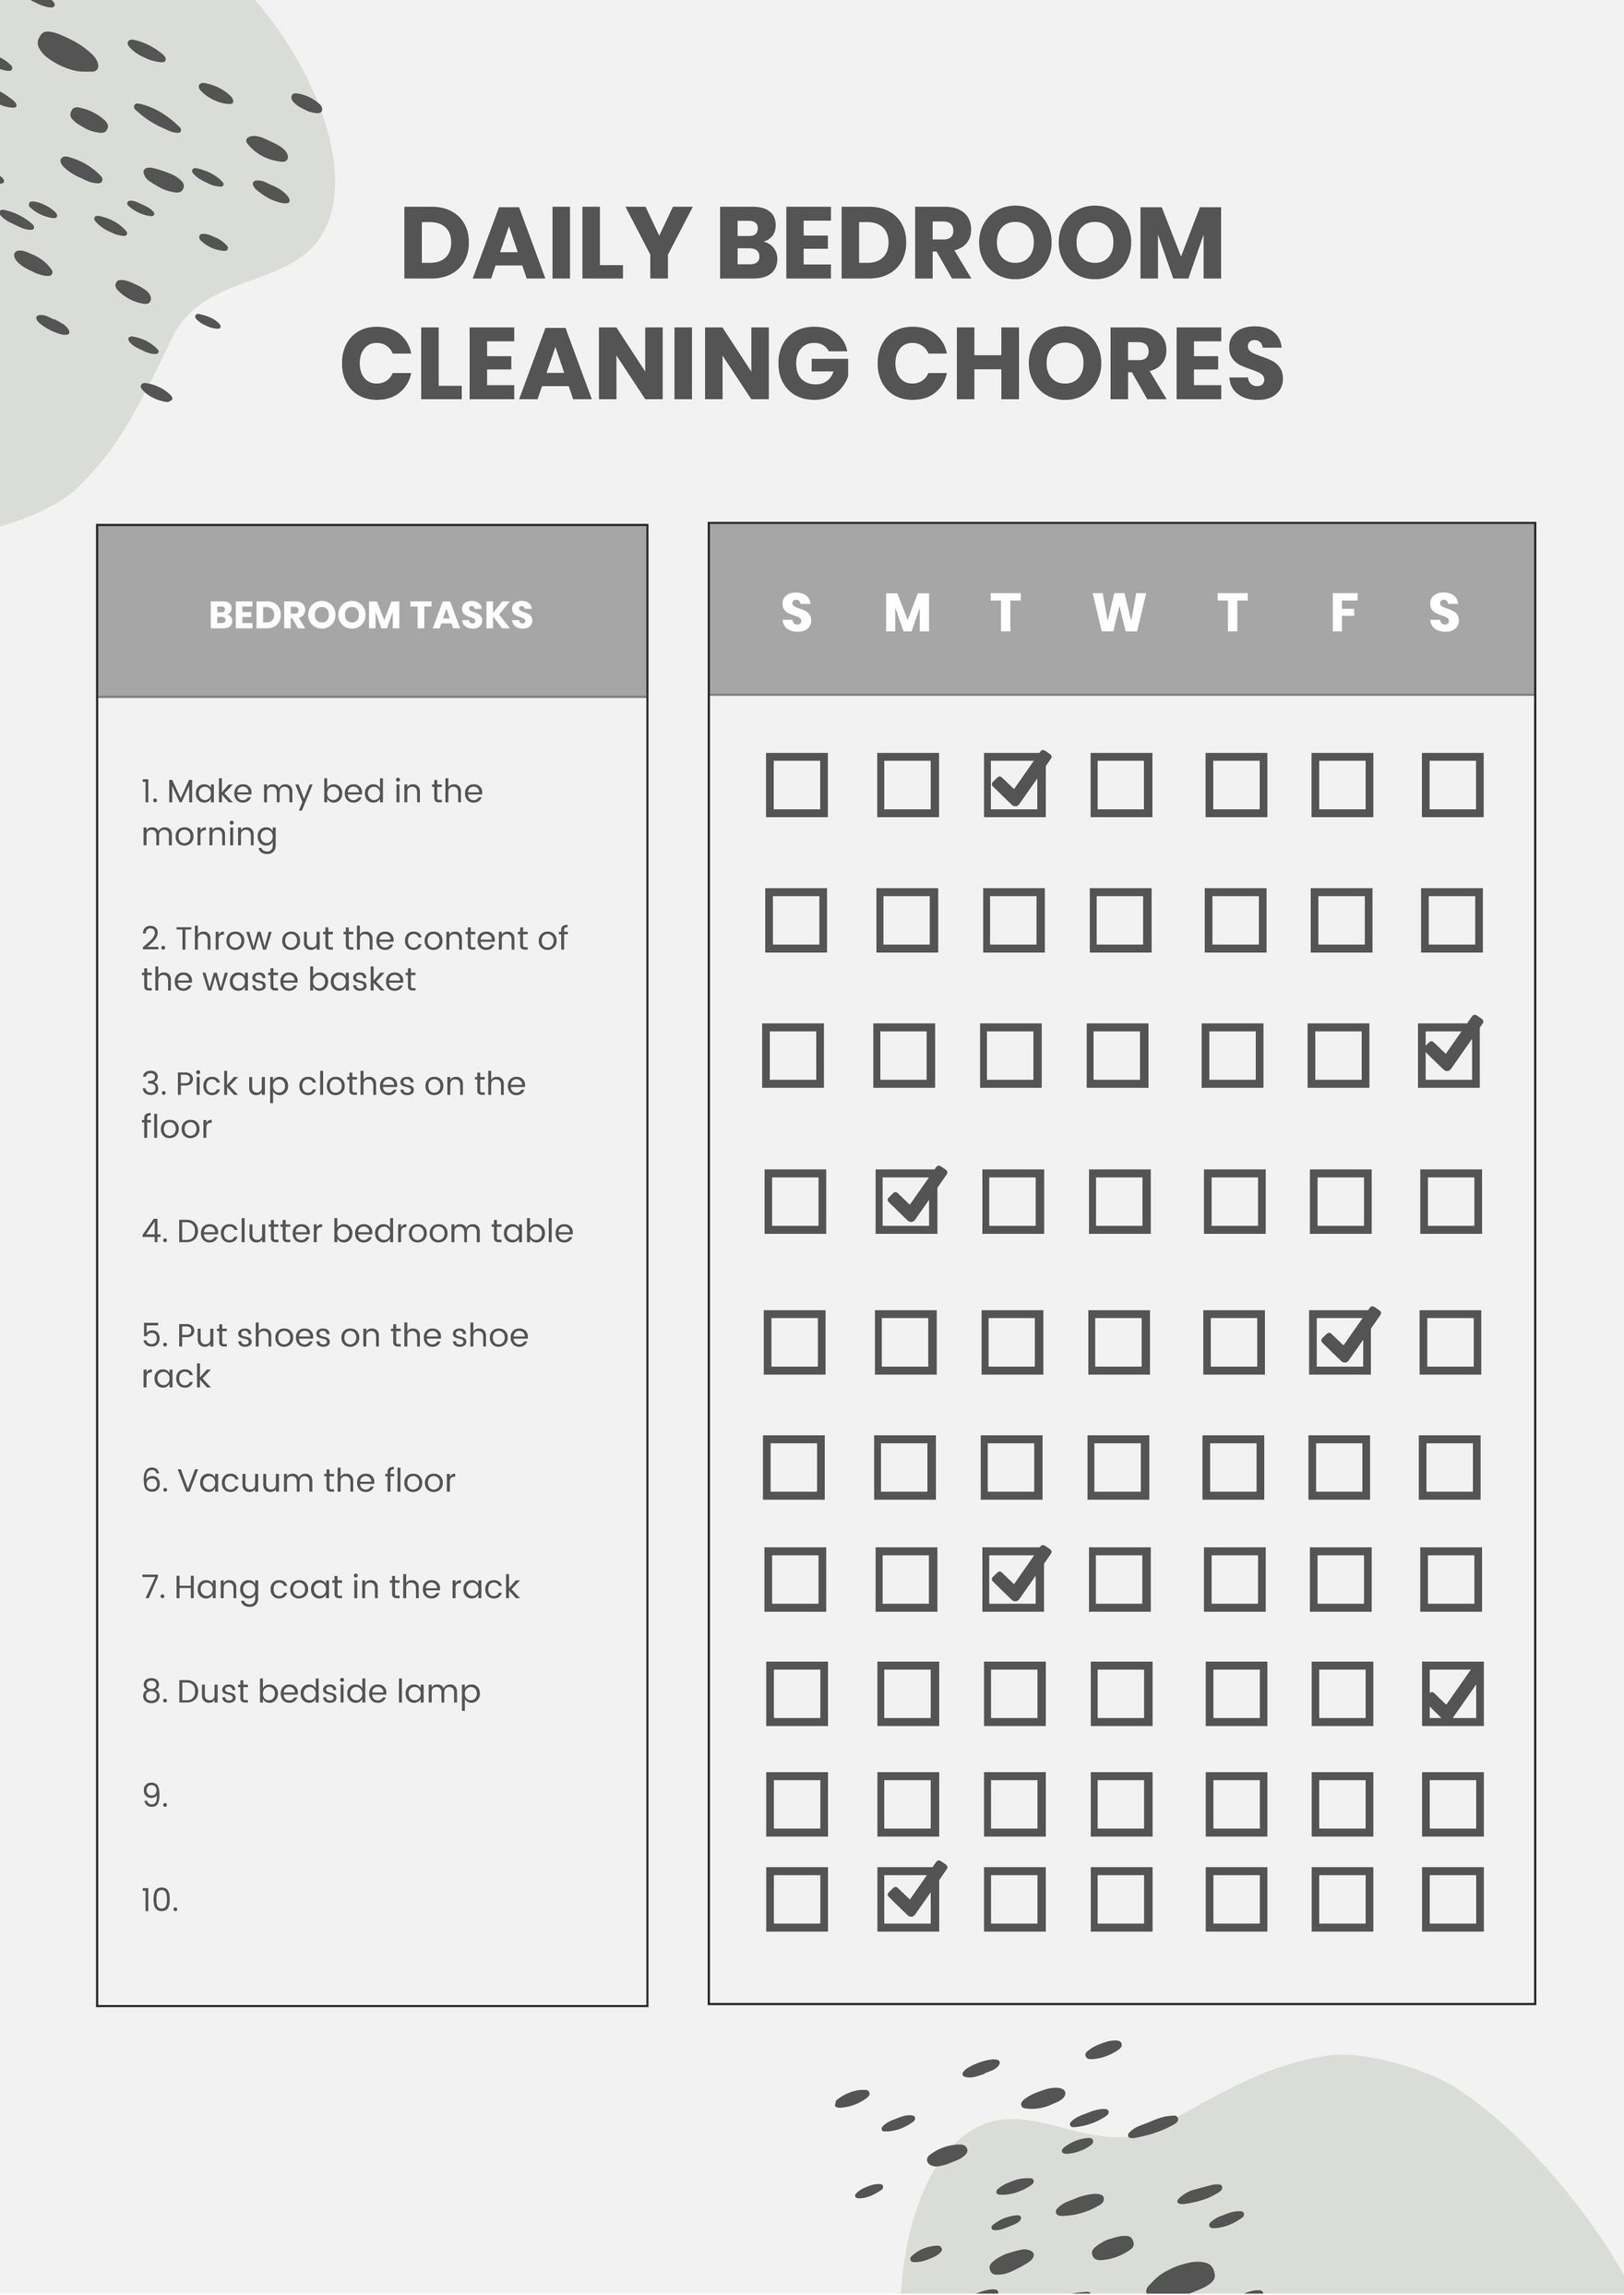 Daily Bedroom Cleaning Chart